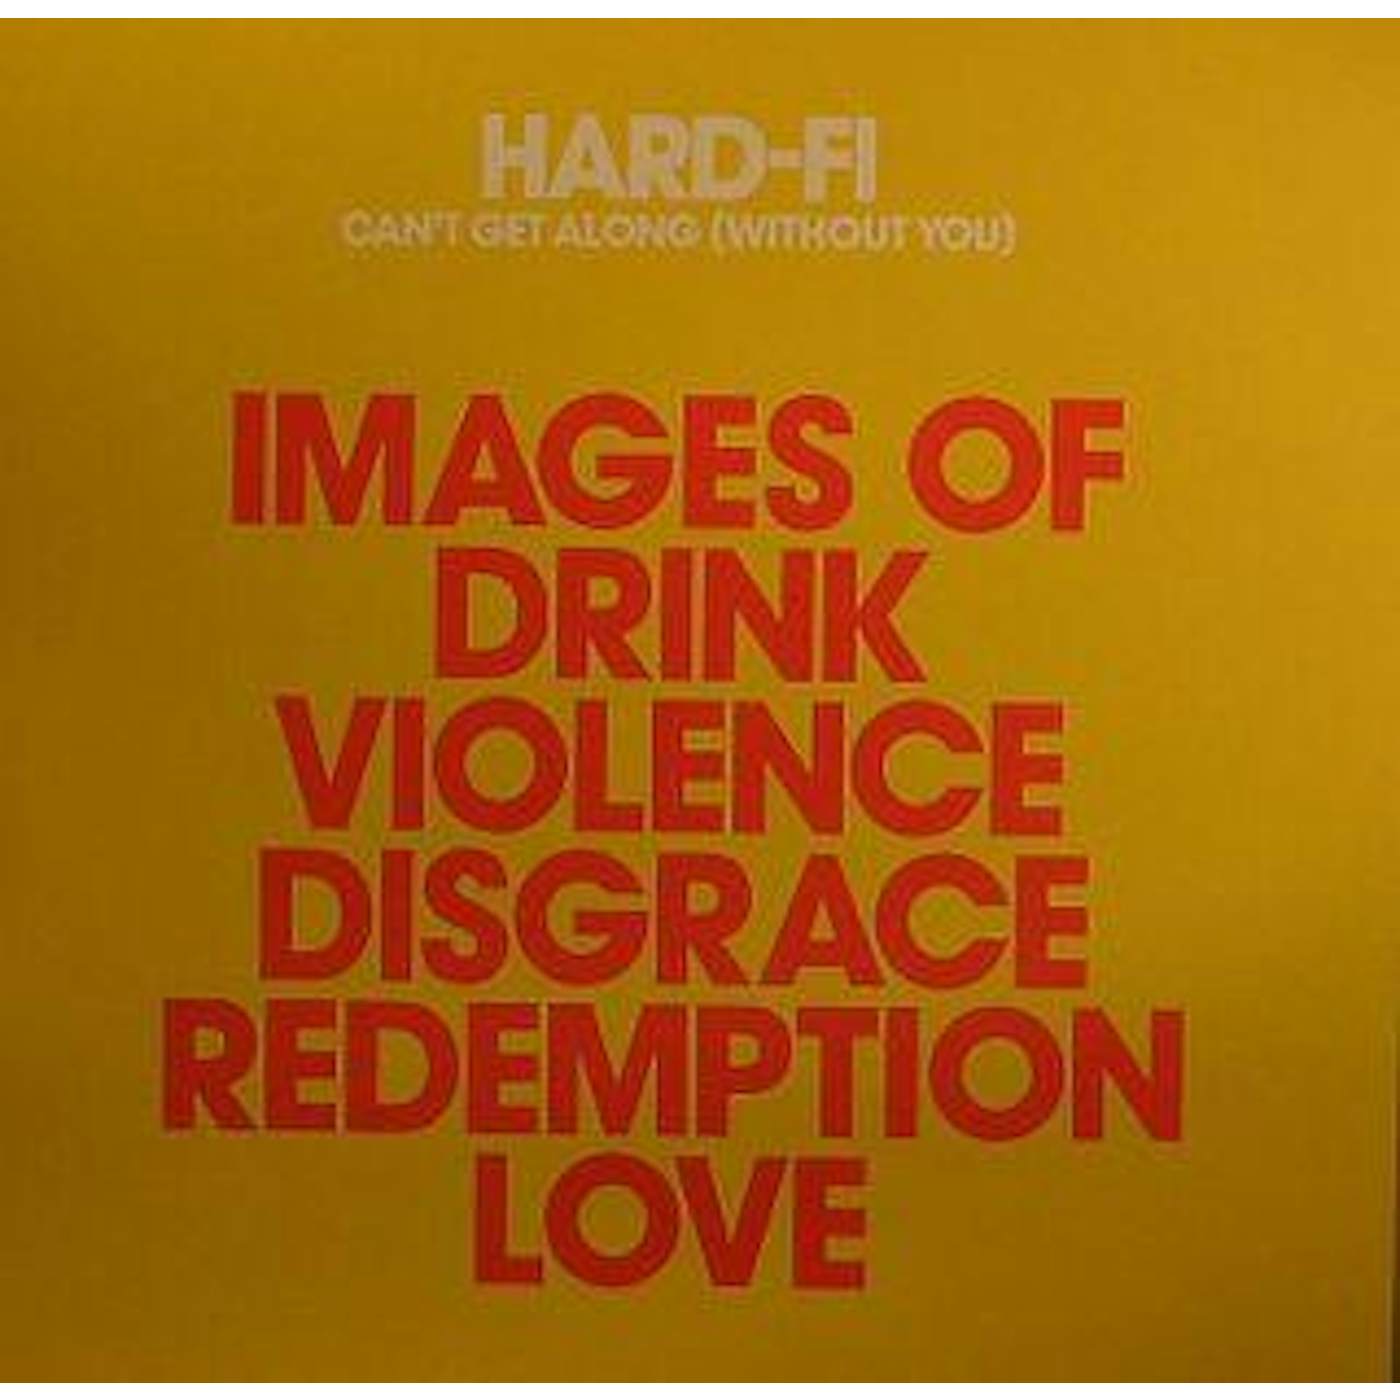 Hard-FI CAN'T GET ALONG (WITHOUT YOU) PT. 2 Vinyl Record